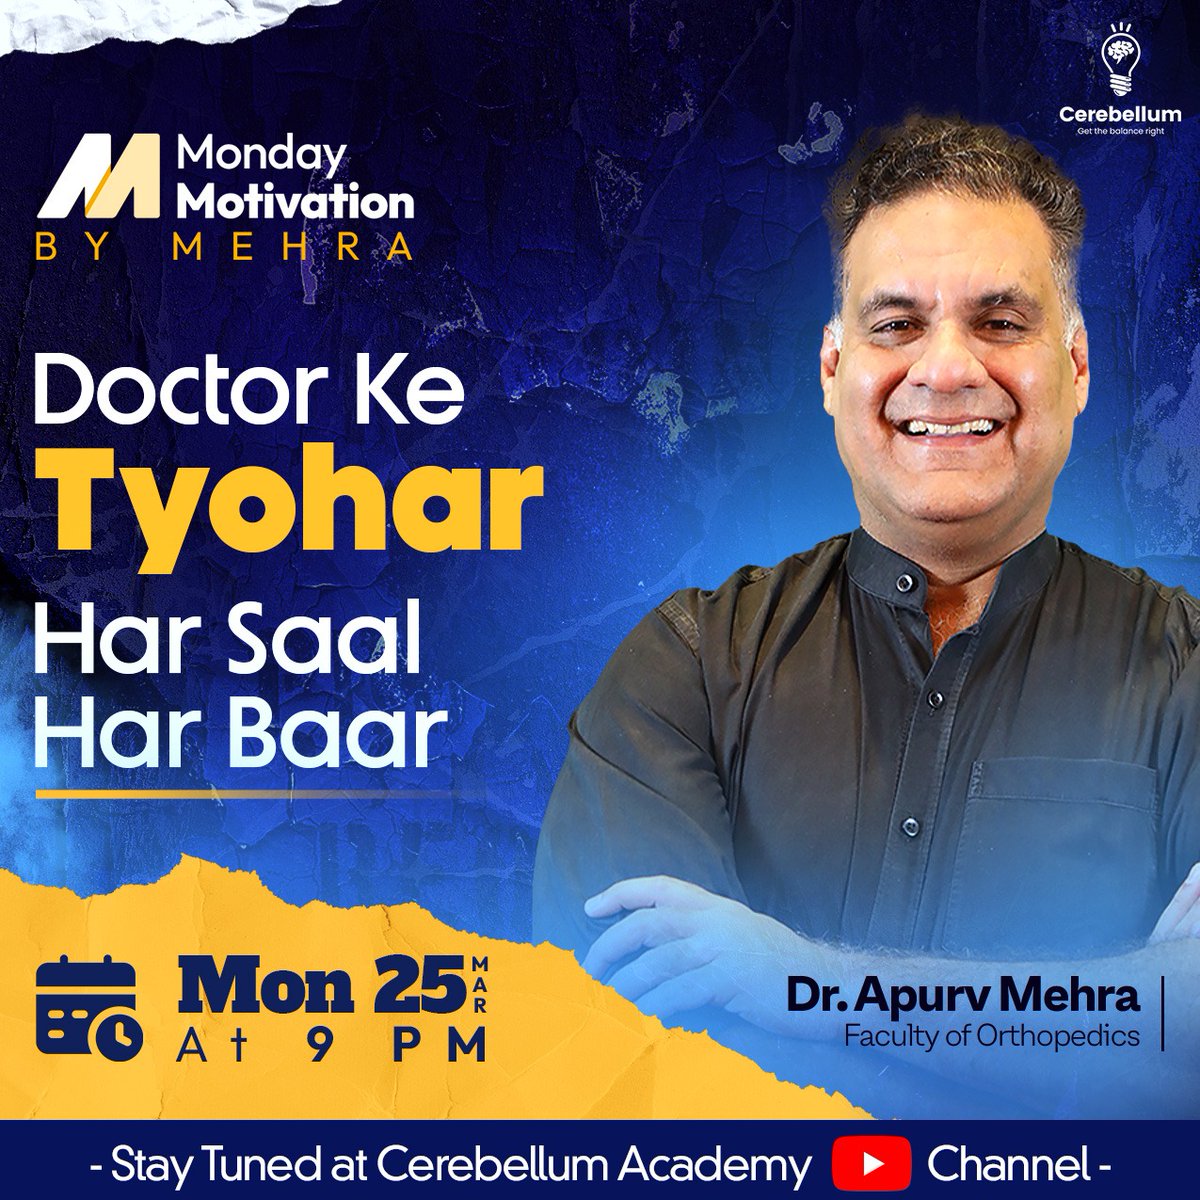 Let Dr. Apurv Mehra be your guide to a successful week ahead with his latest episode of Monday Motivation by Mehra. Get ready to conquer the day!

Episode 17 - Doctor Ke Tyohar 
.
Cerebellum Academy
An Institute For The Students by The Teachers

#DrApurvMehra #MMM #Cerebellum